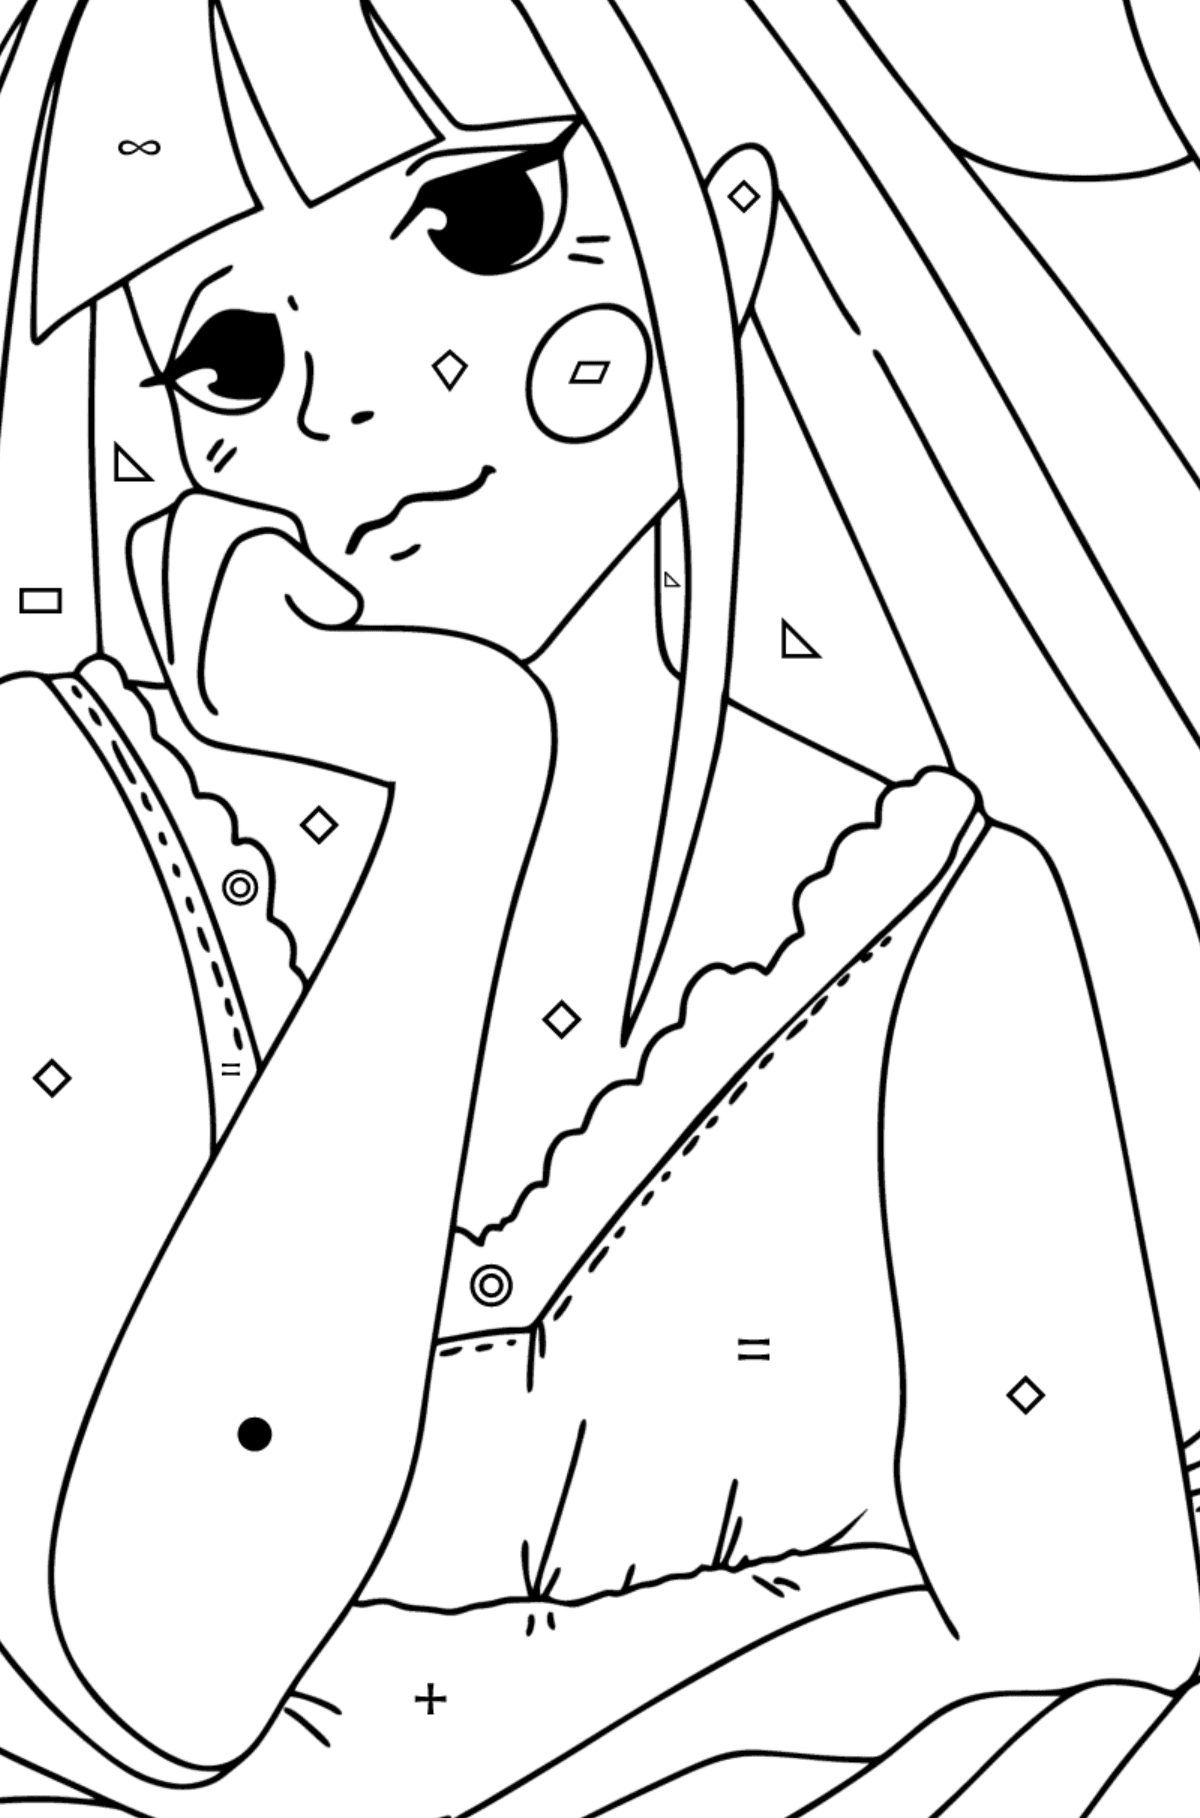 Teenage anime girl coloring page - Coloring by Symbols and Geometric Shapes for Kids